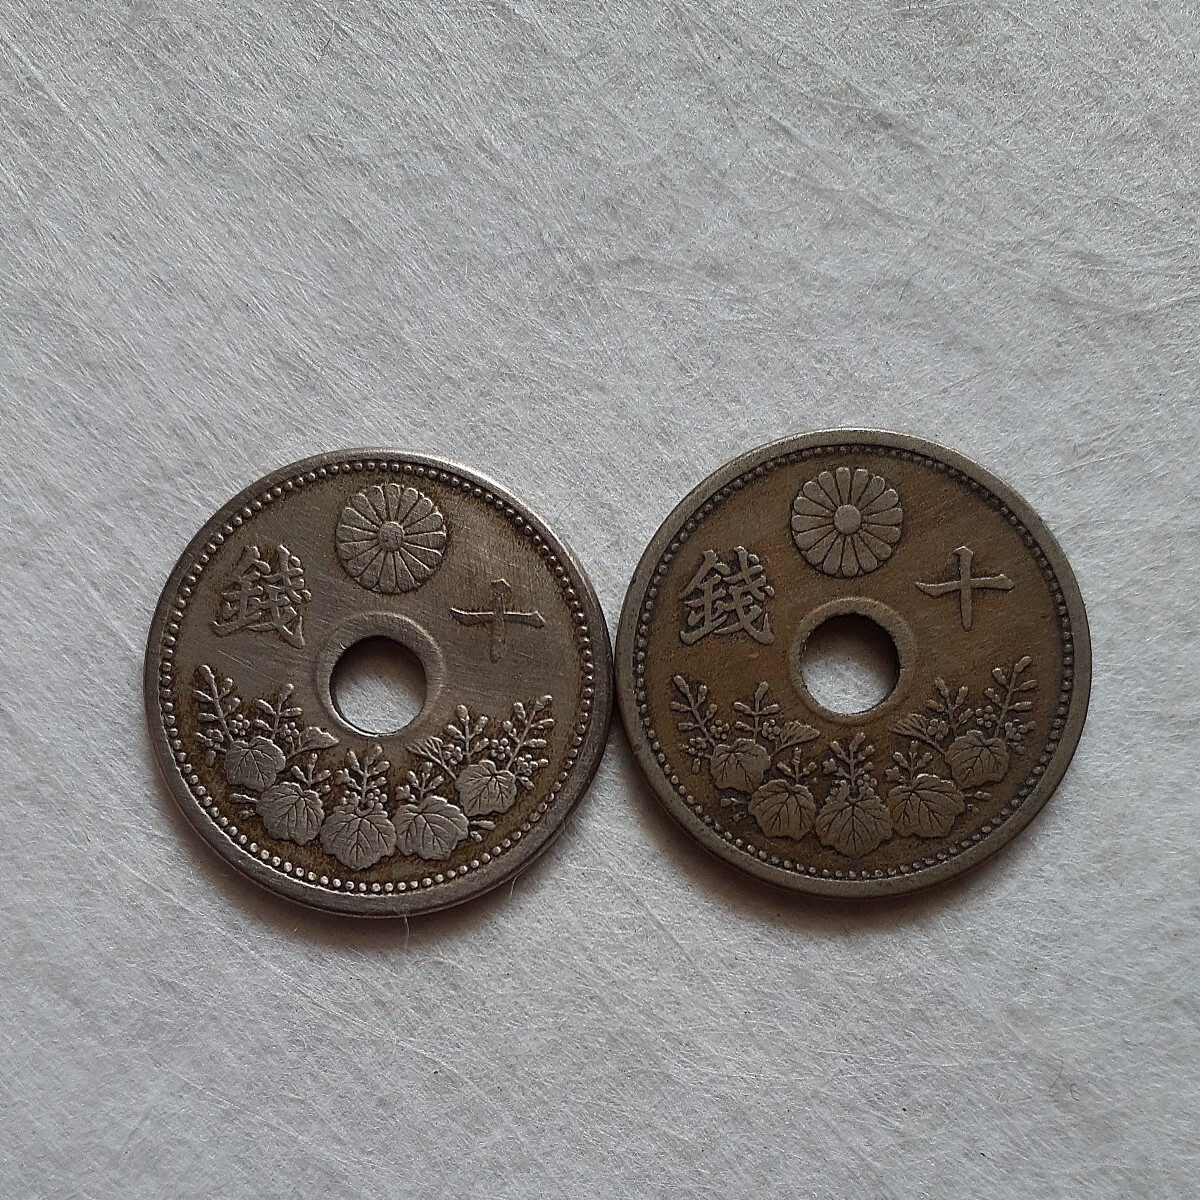 10 sen white copper coin Taisho 9 year from Taisho 15 year 6 sheets together 